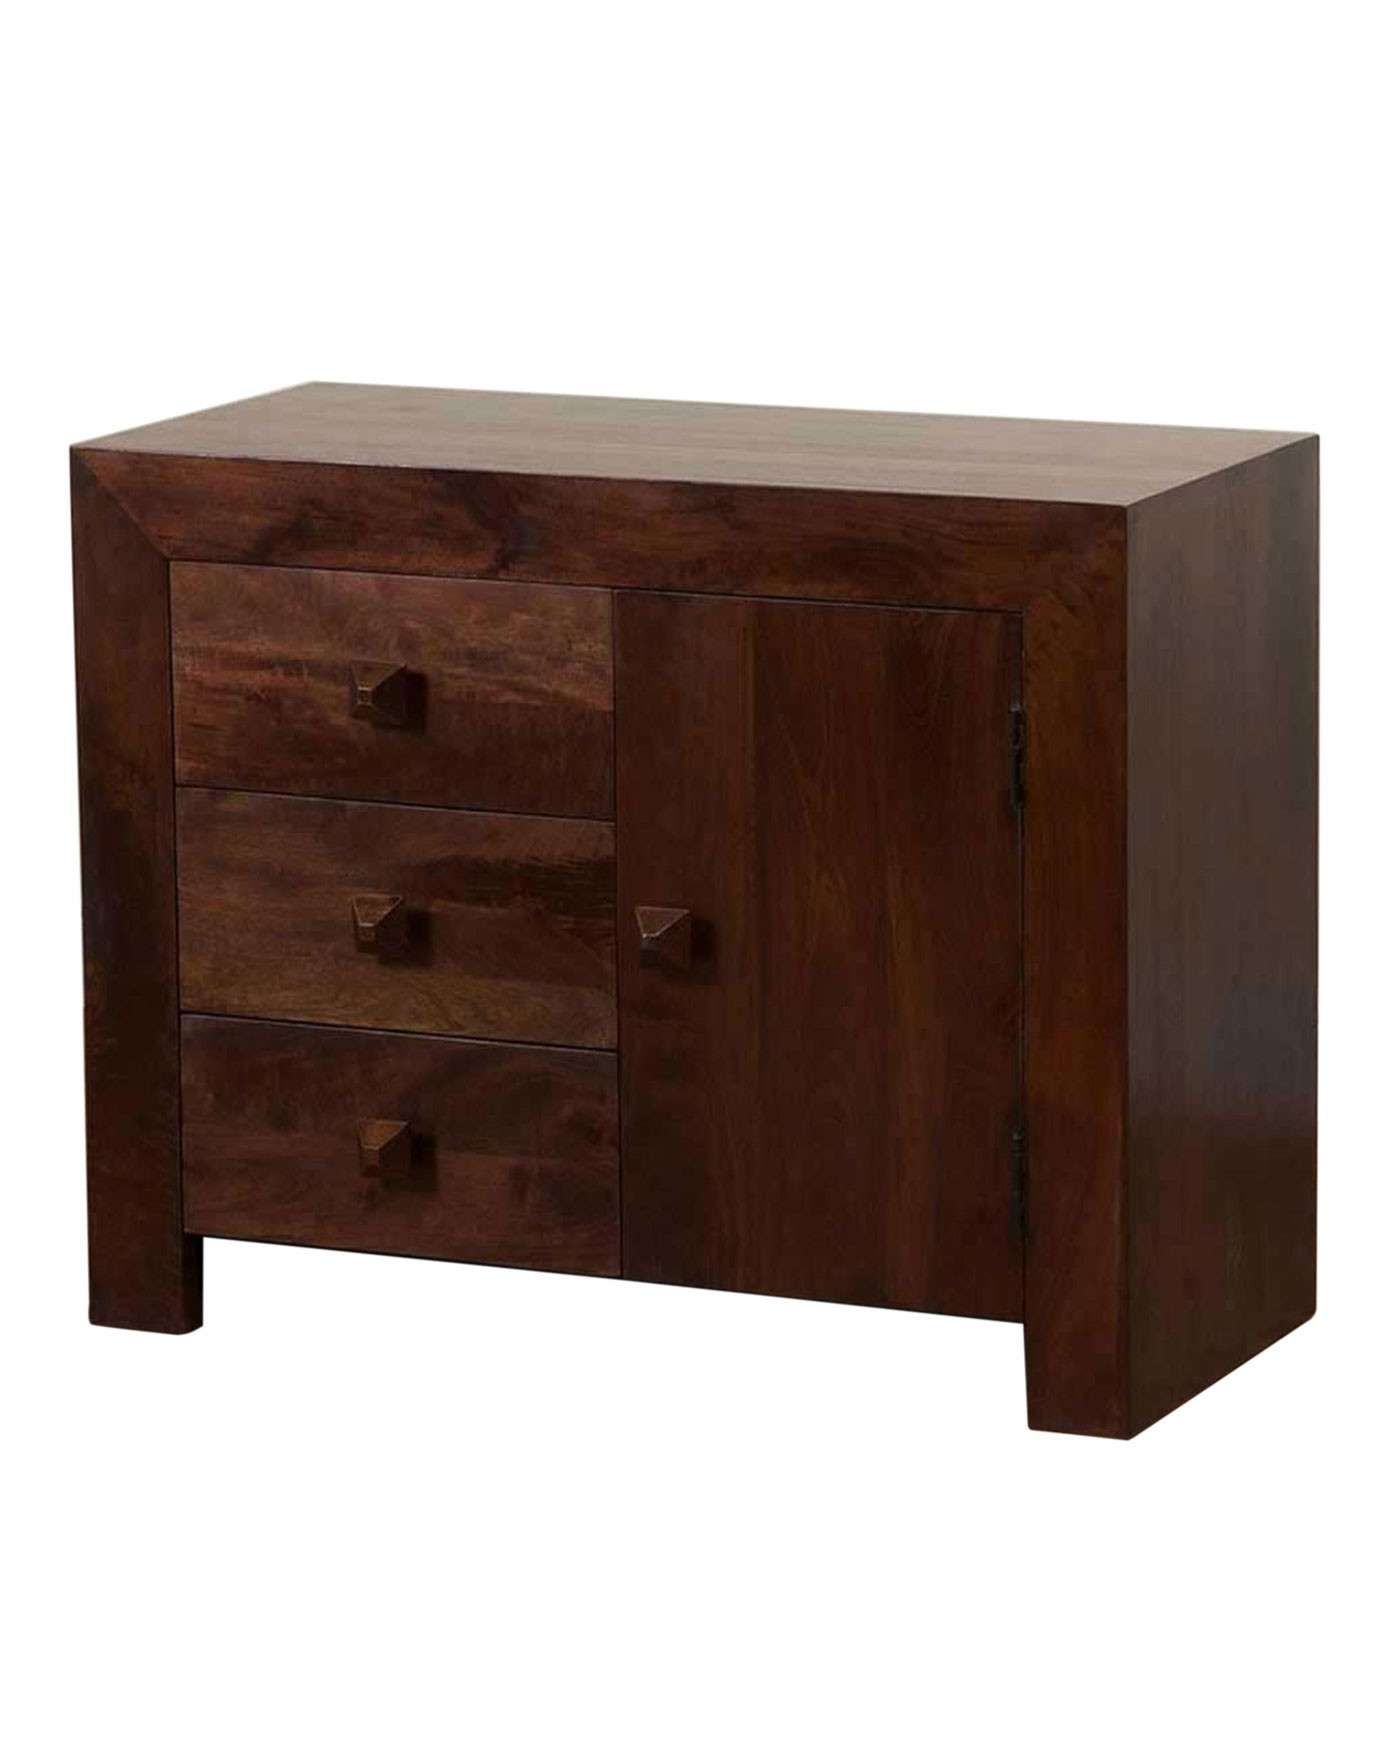 Dakota Small Sideboard With 3 Drawers Dark Shade – Homescapes Throughout Small Dark Wood Sideboards (View 3 of 20)